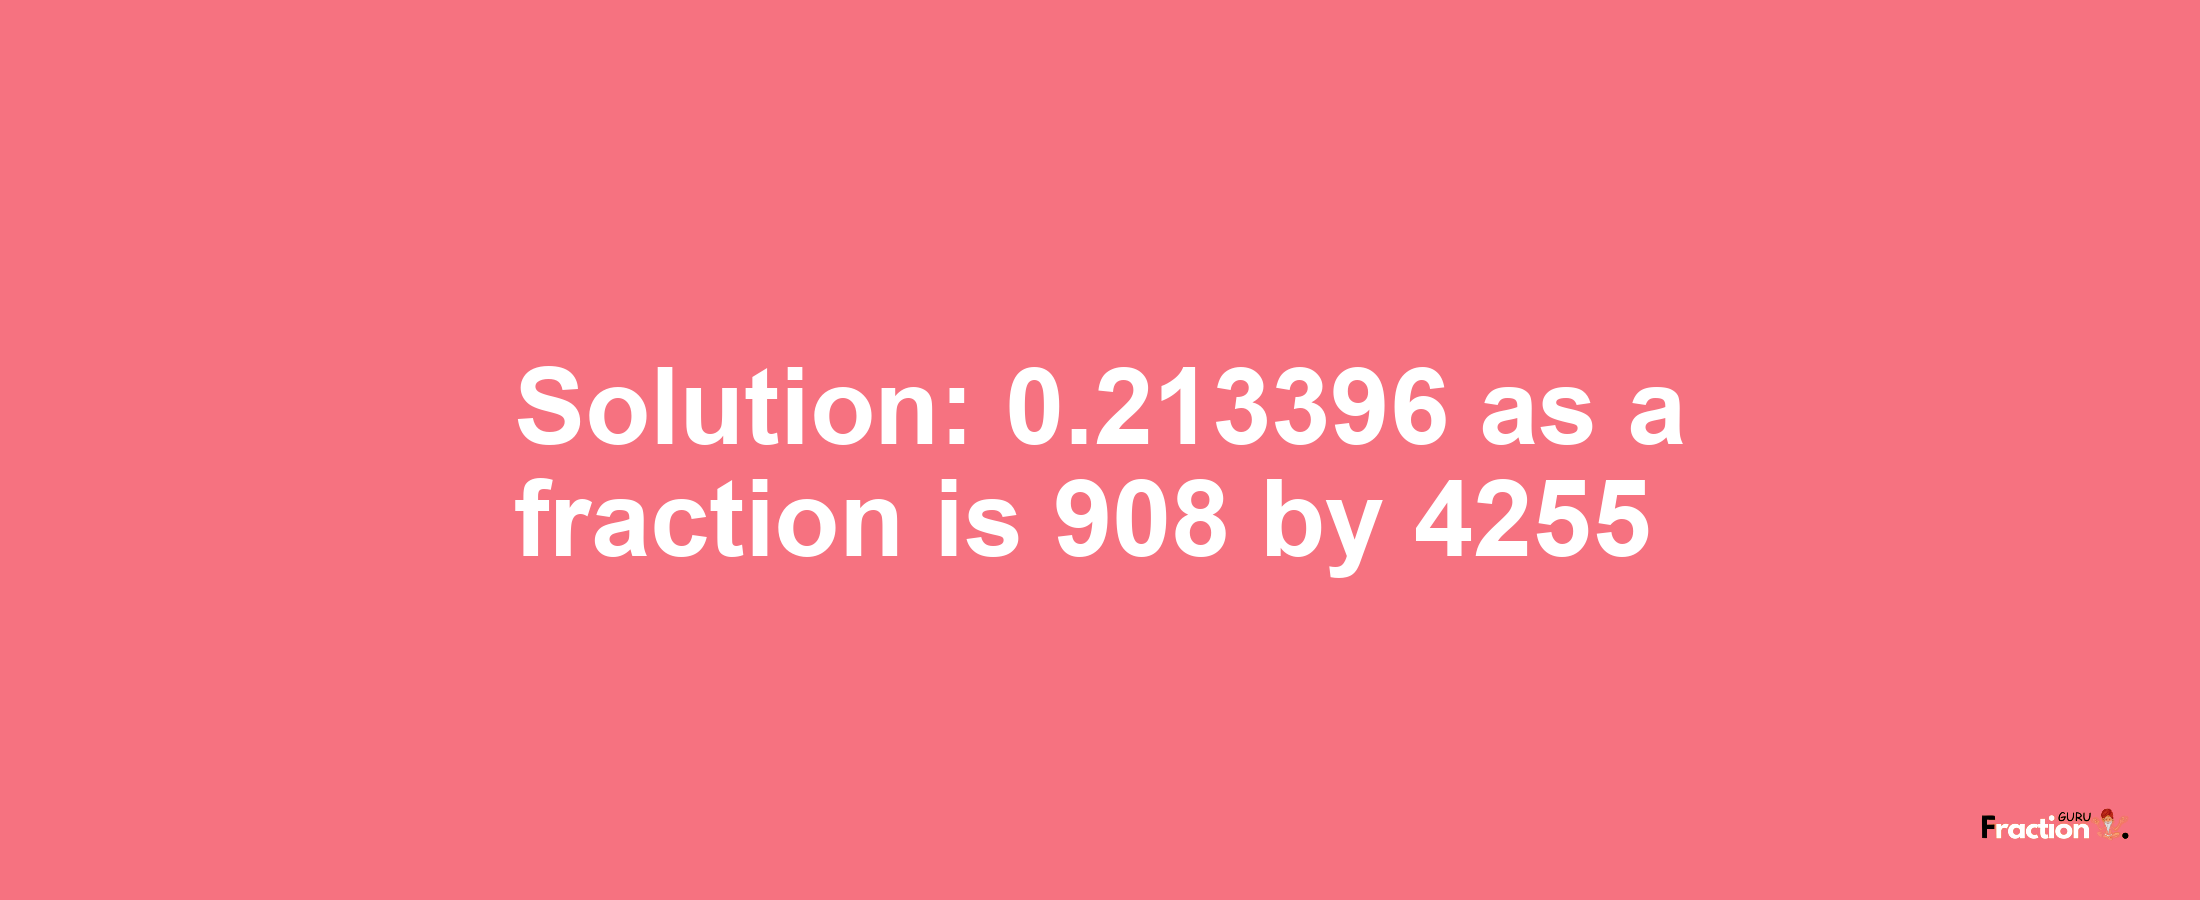 Solution:0.213396 as a fraction is 908/4255